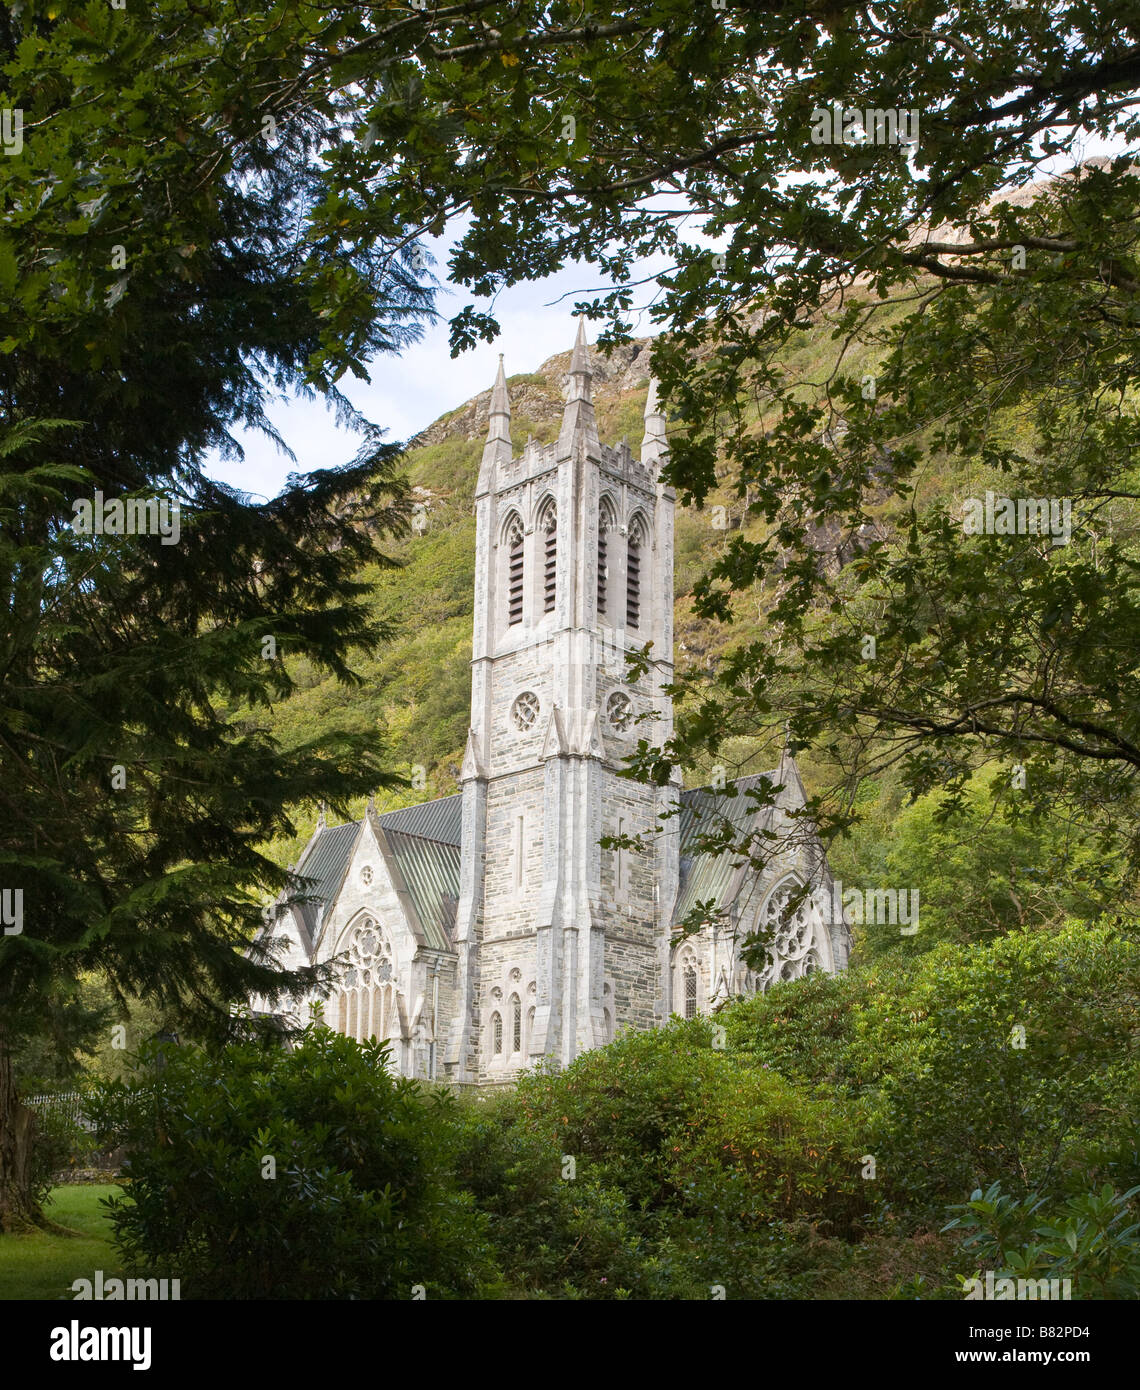 Gothic Chapel at Kylemore. The spire of the chapel at Kylemore surrounded by the trees of the grounds Stock Photo